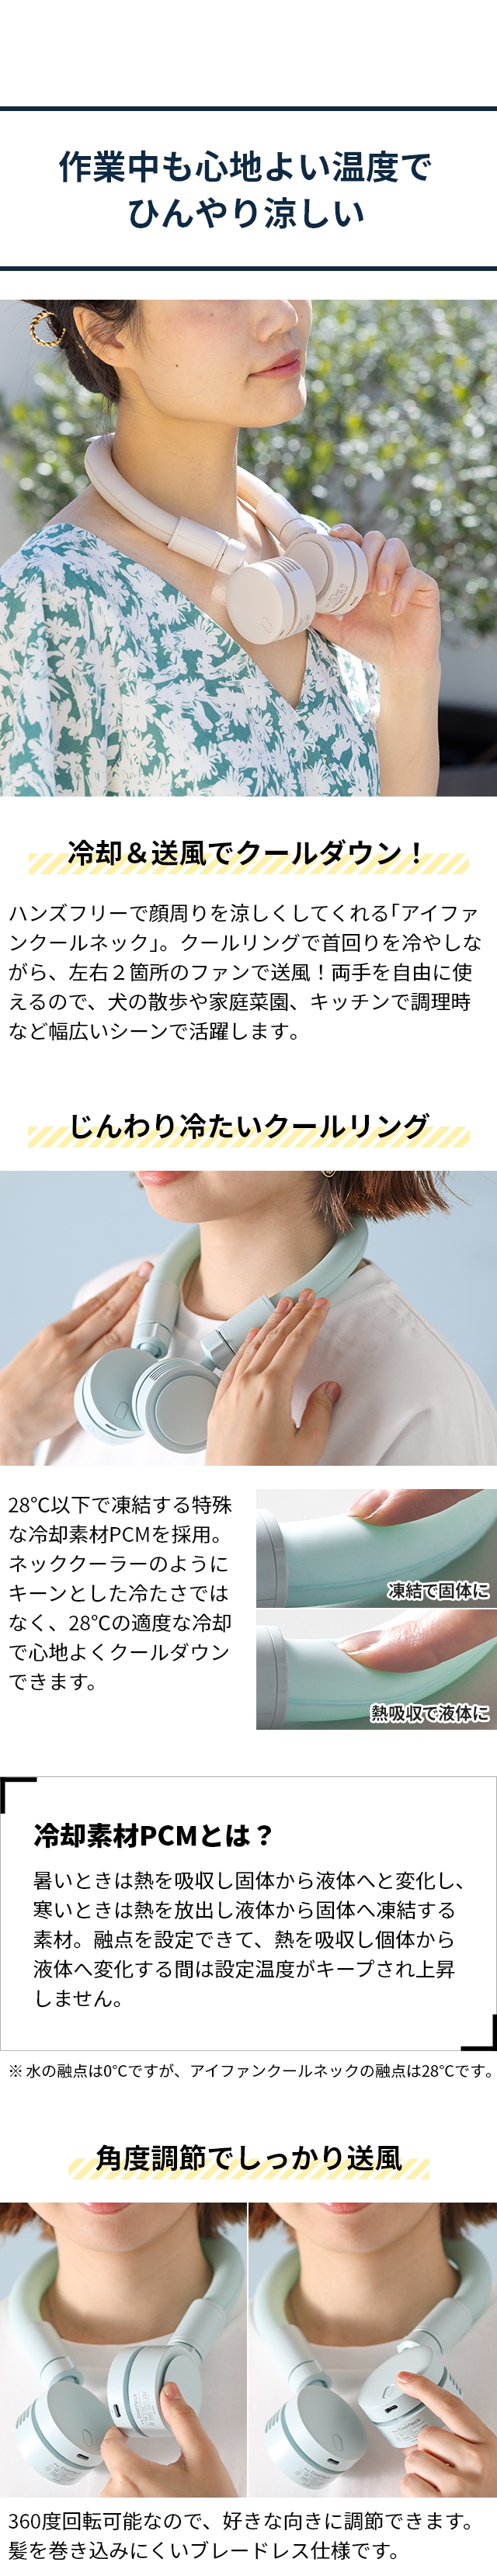 ELAiCE (エレス) アイファンクールネック iFan Cool Neck IF-CN24